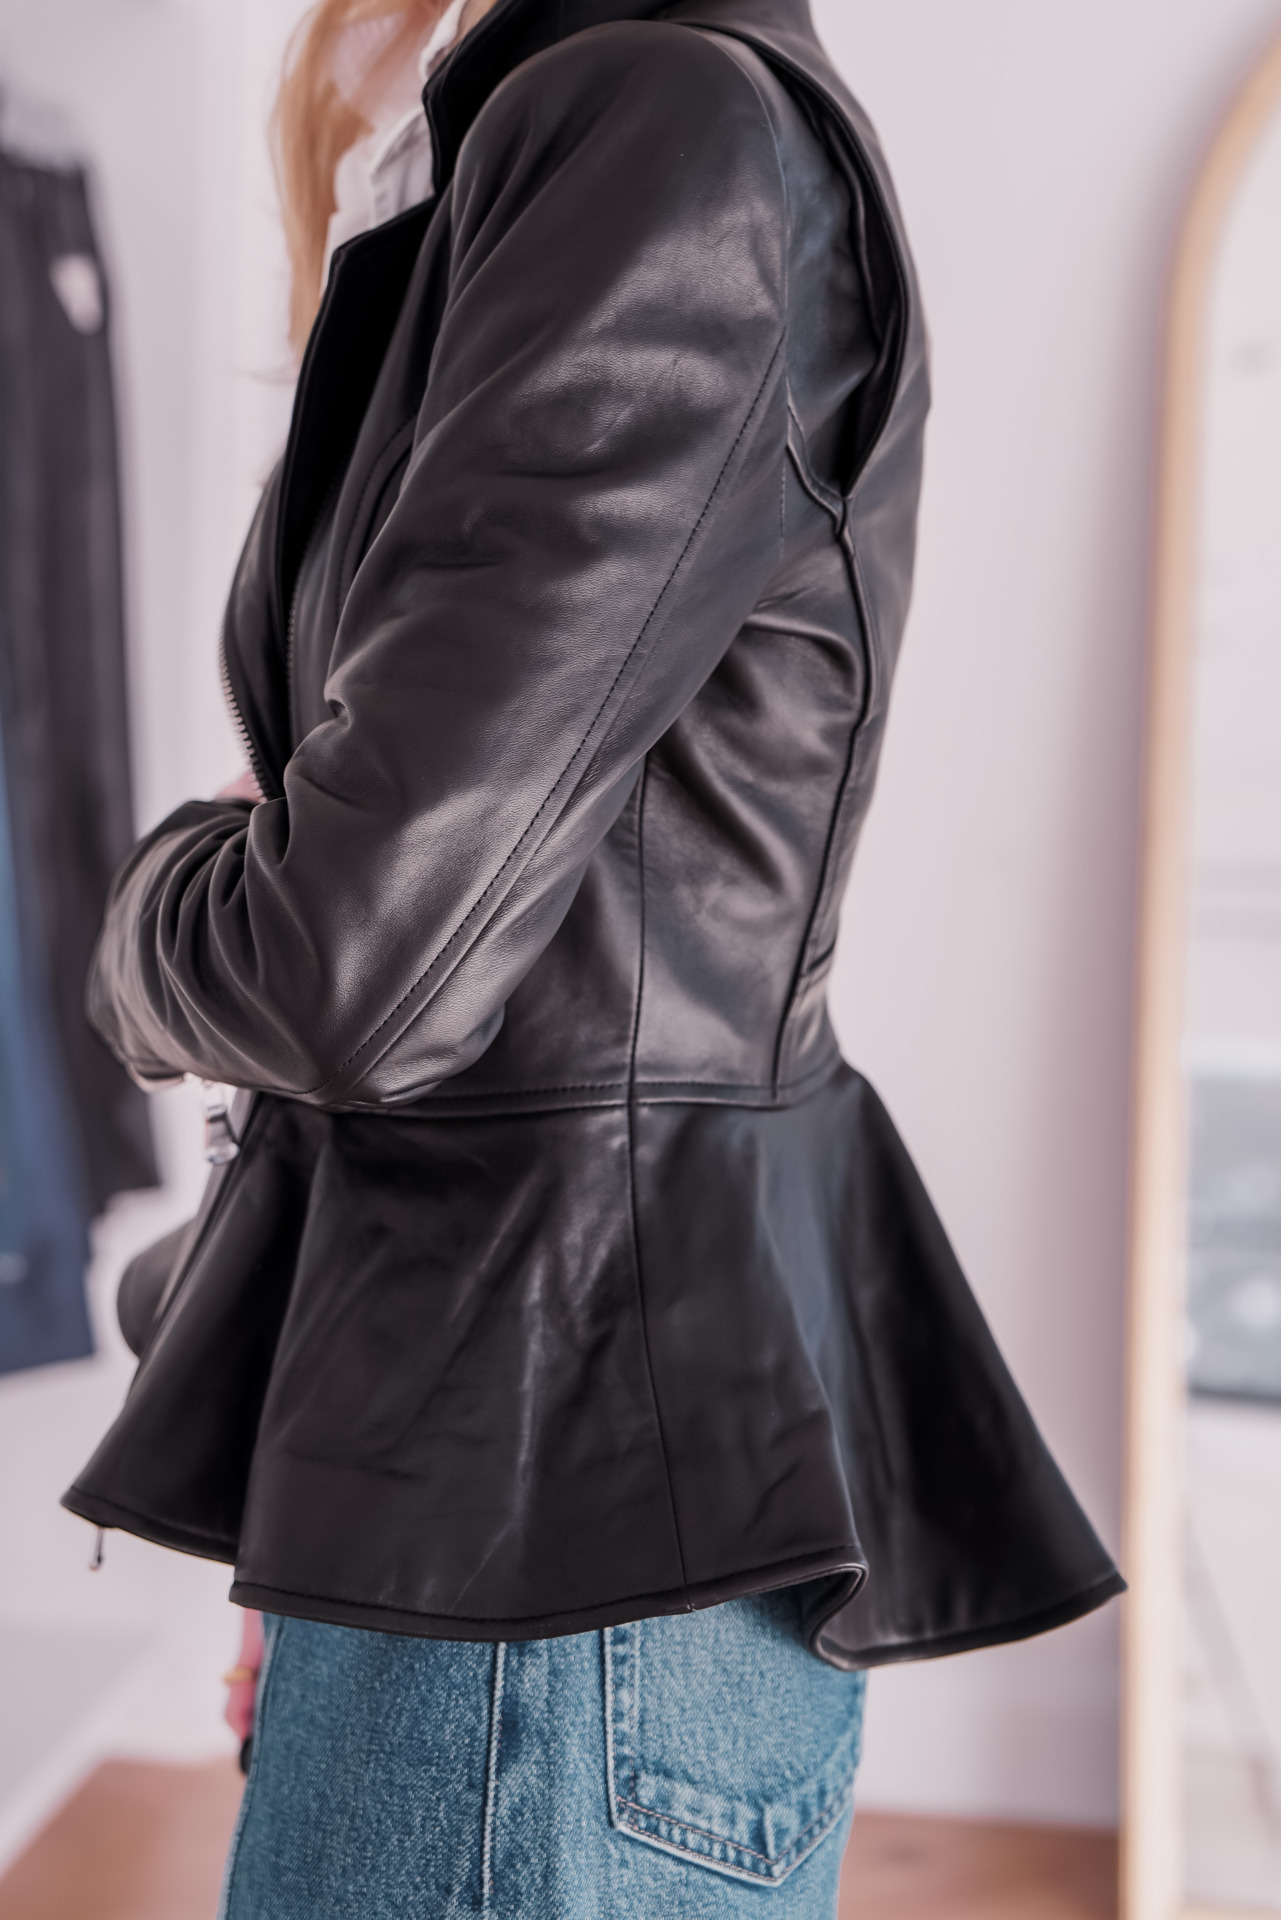 peplum leather jacket by L’Agence